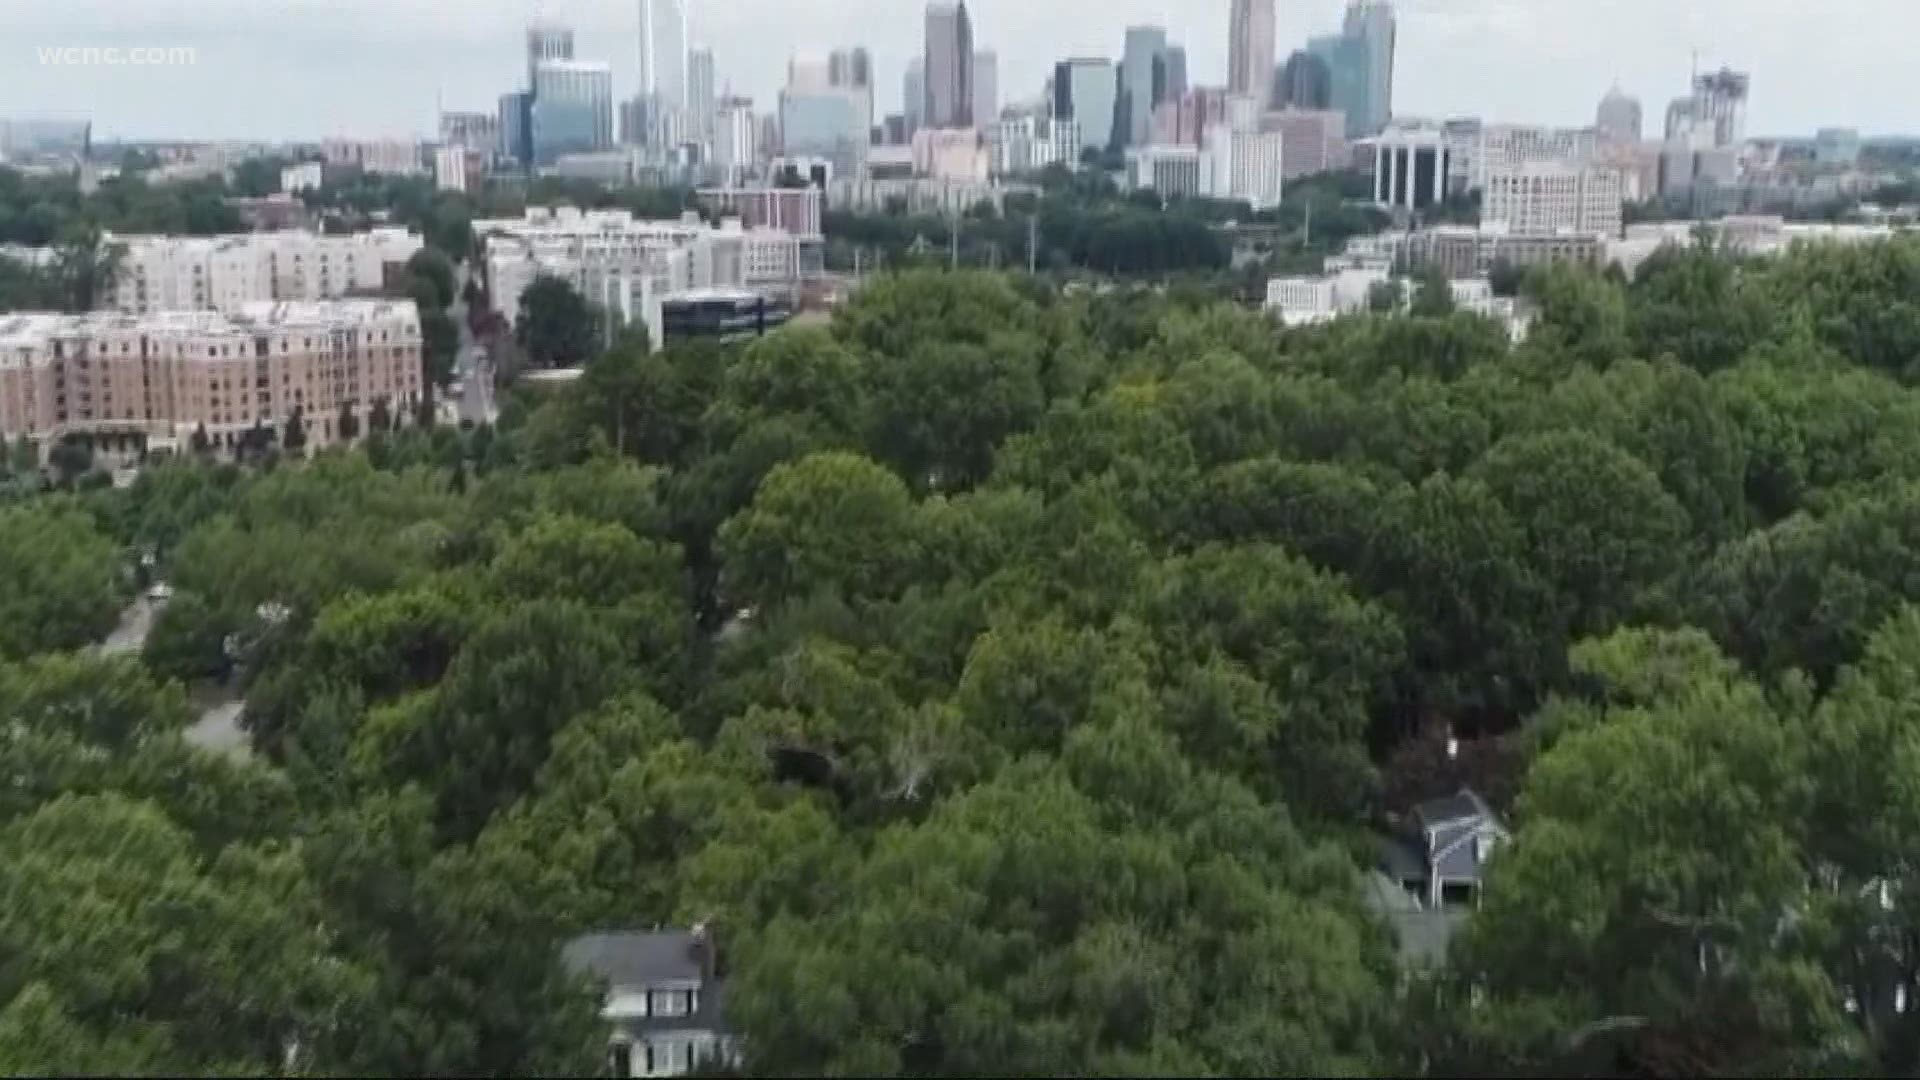 From 2012 to 2018, Charlotte lost 4% of its tree canopy.